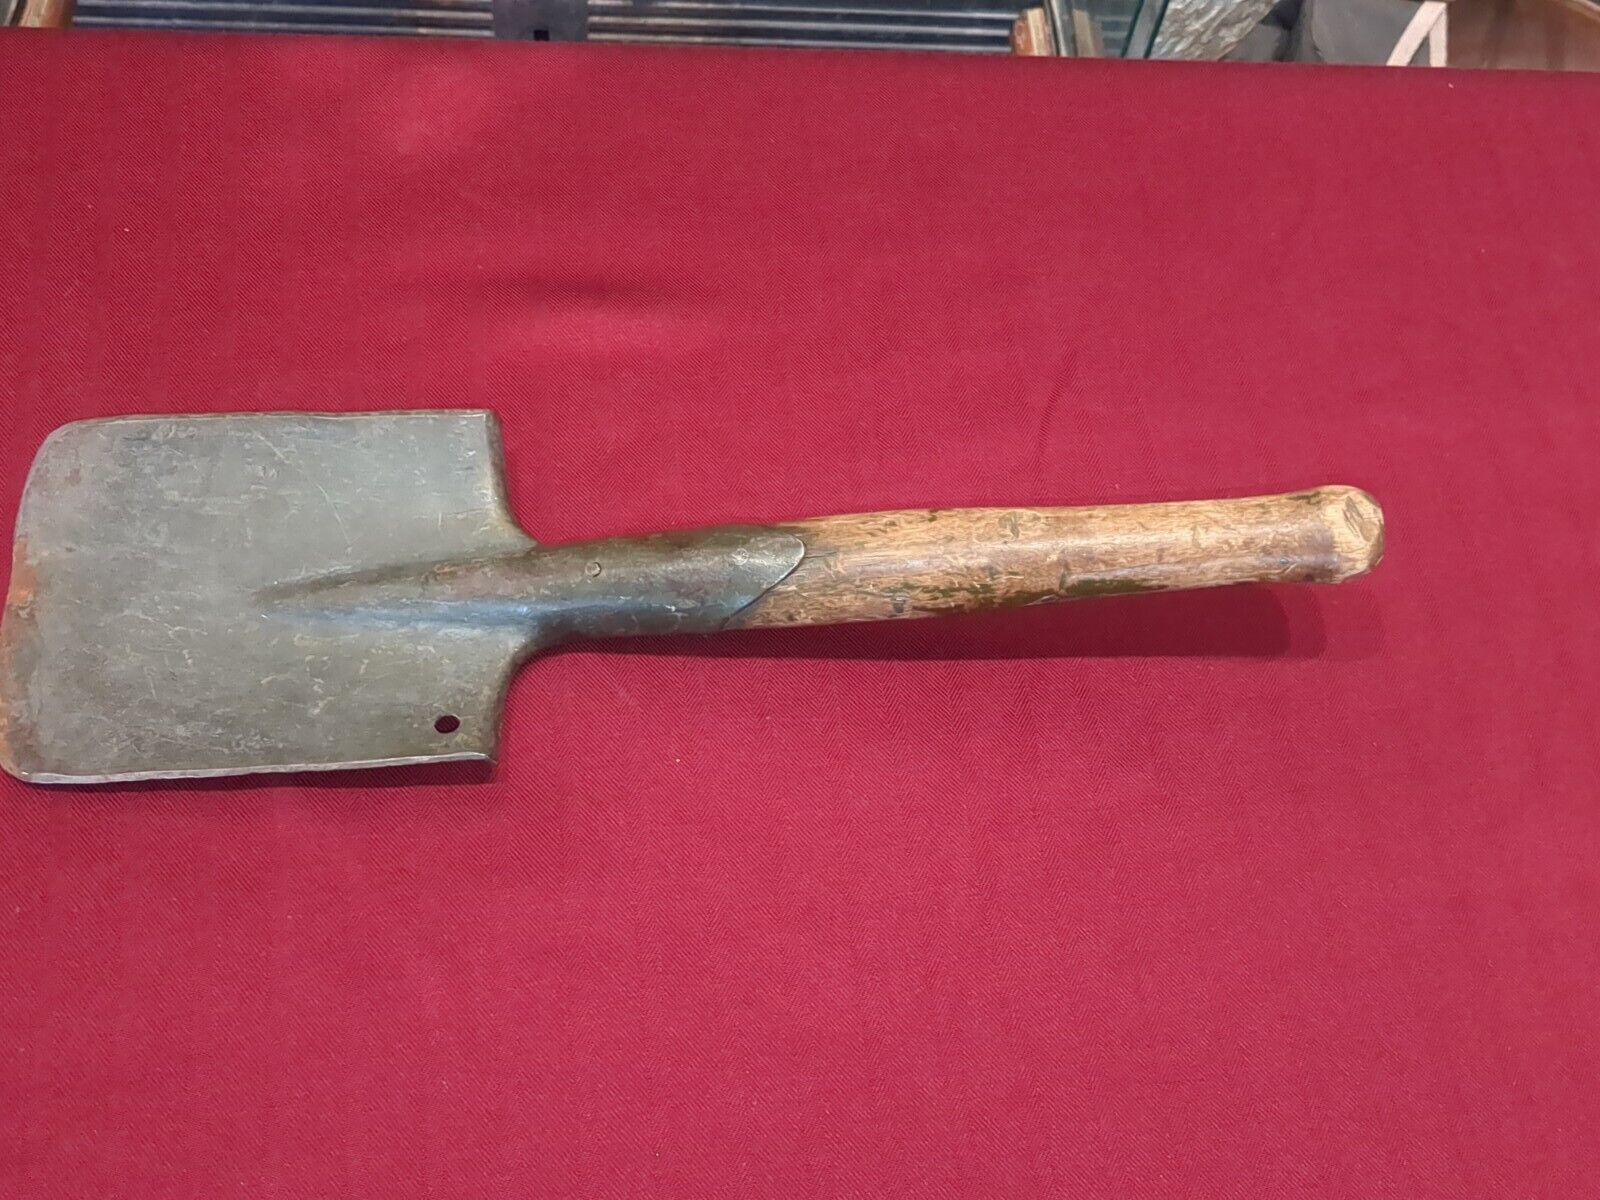  Antique WW1 Entrenching Tool Shovel